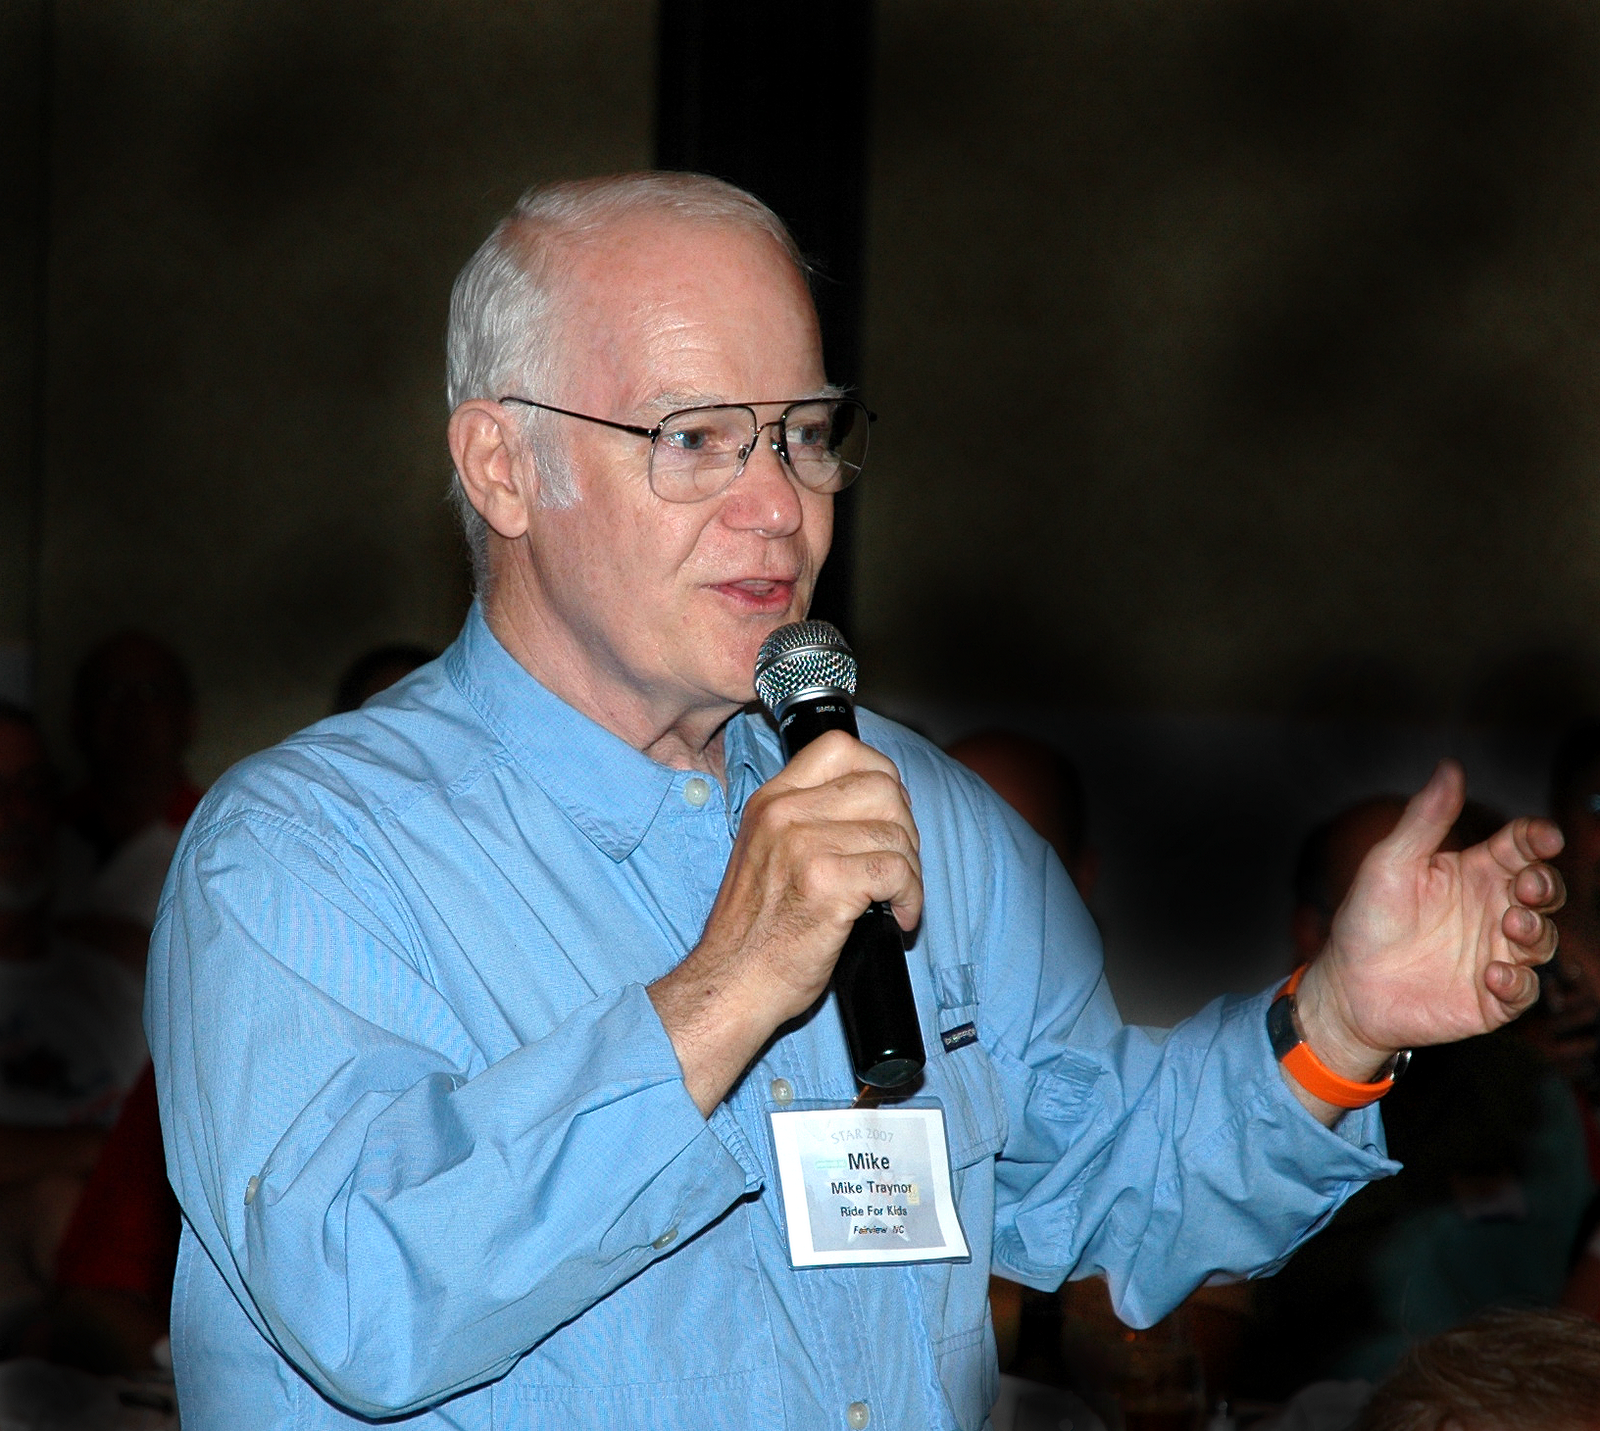 [Mike_Traynor_speaking_about_Ride_for_Kids_at_STAR_2007[1].PNG]